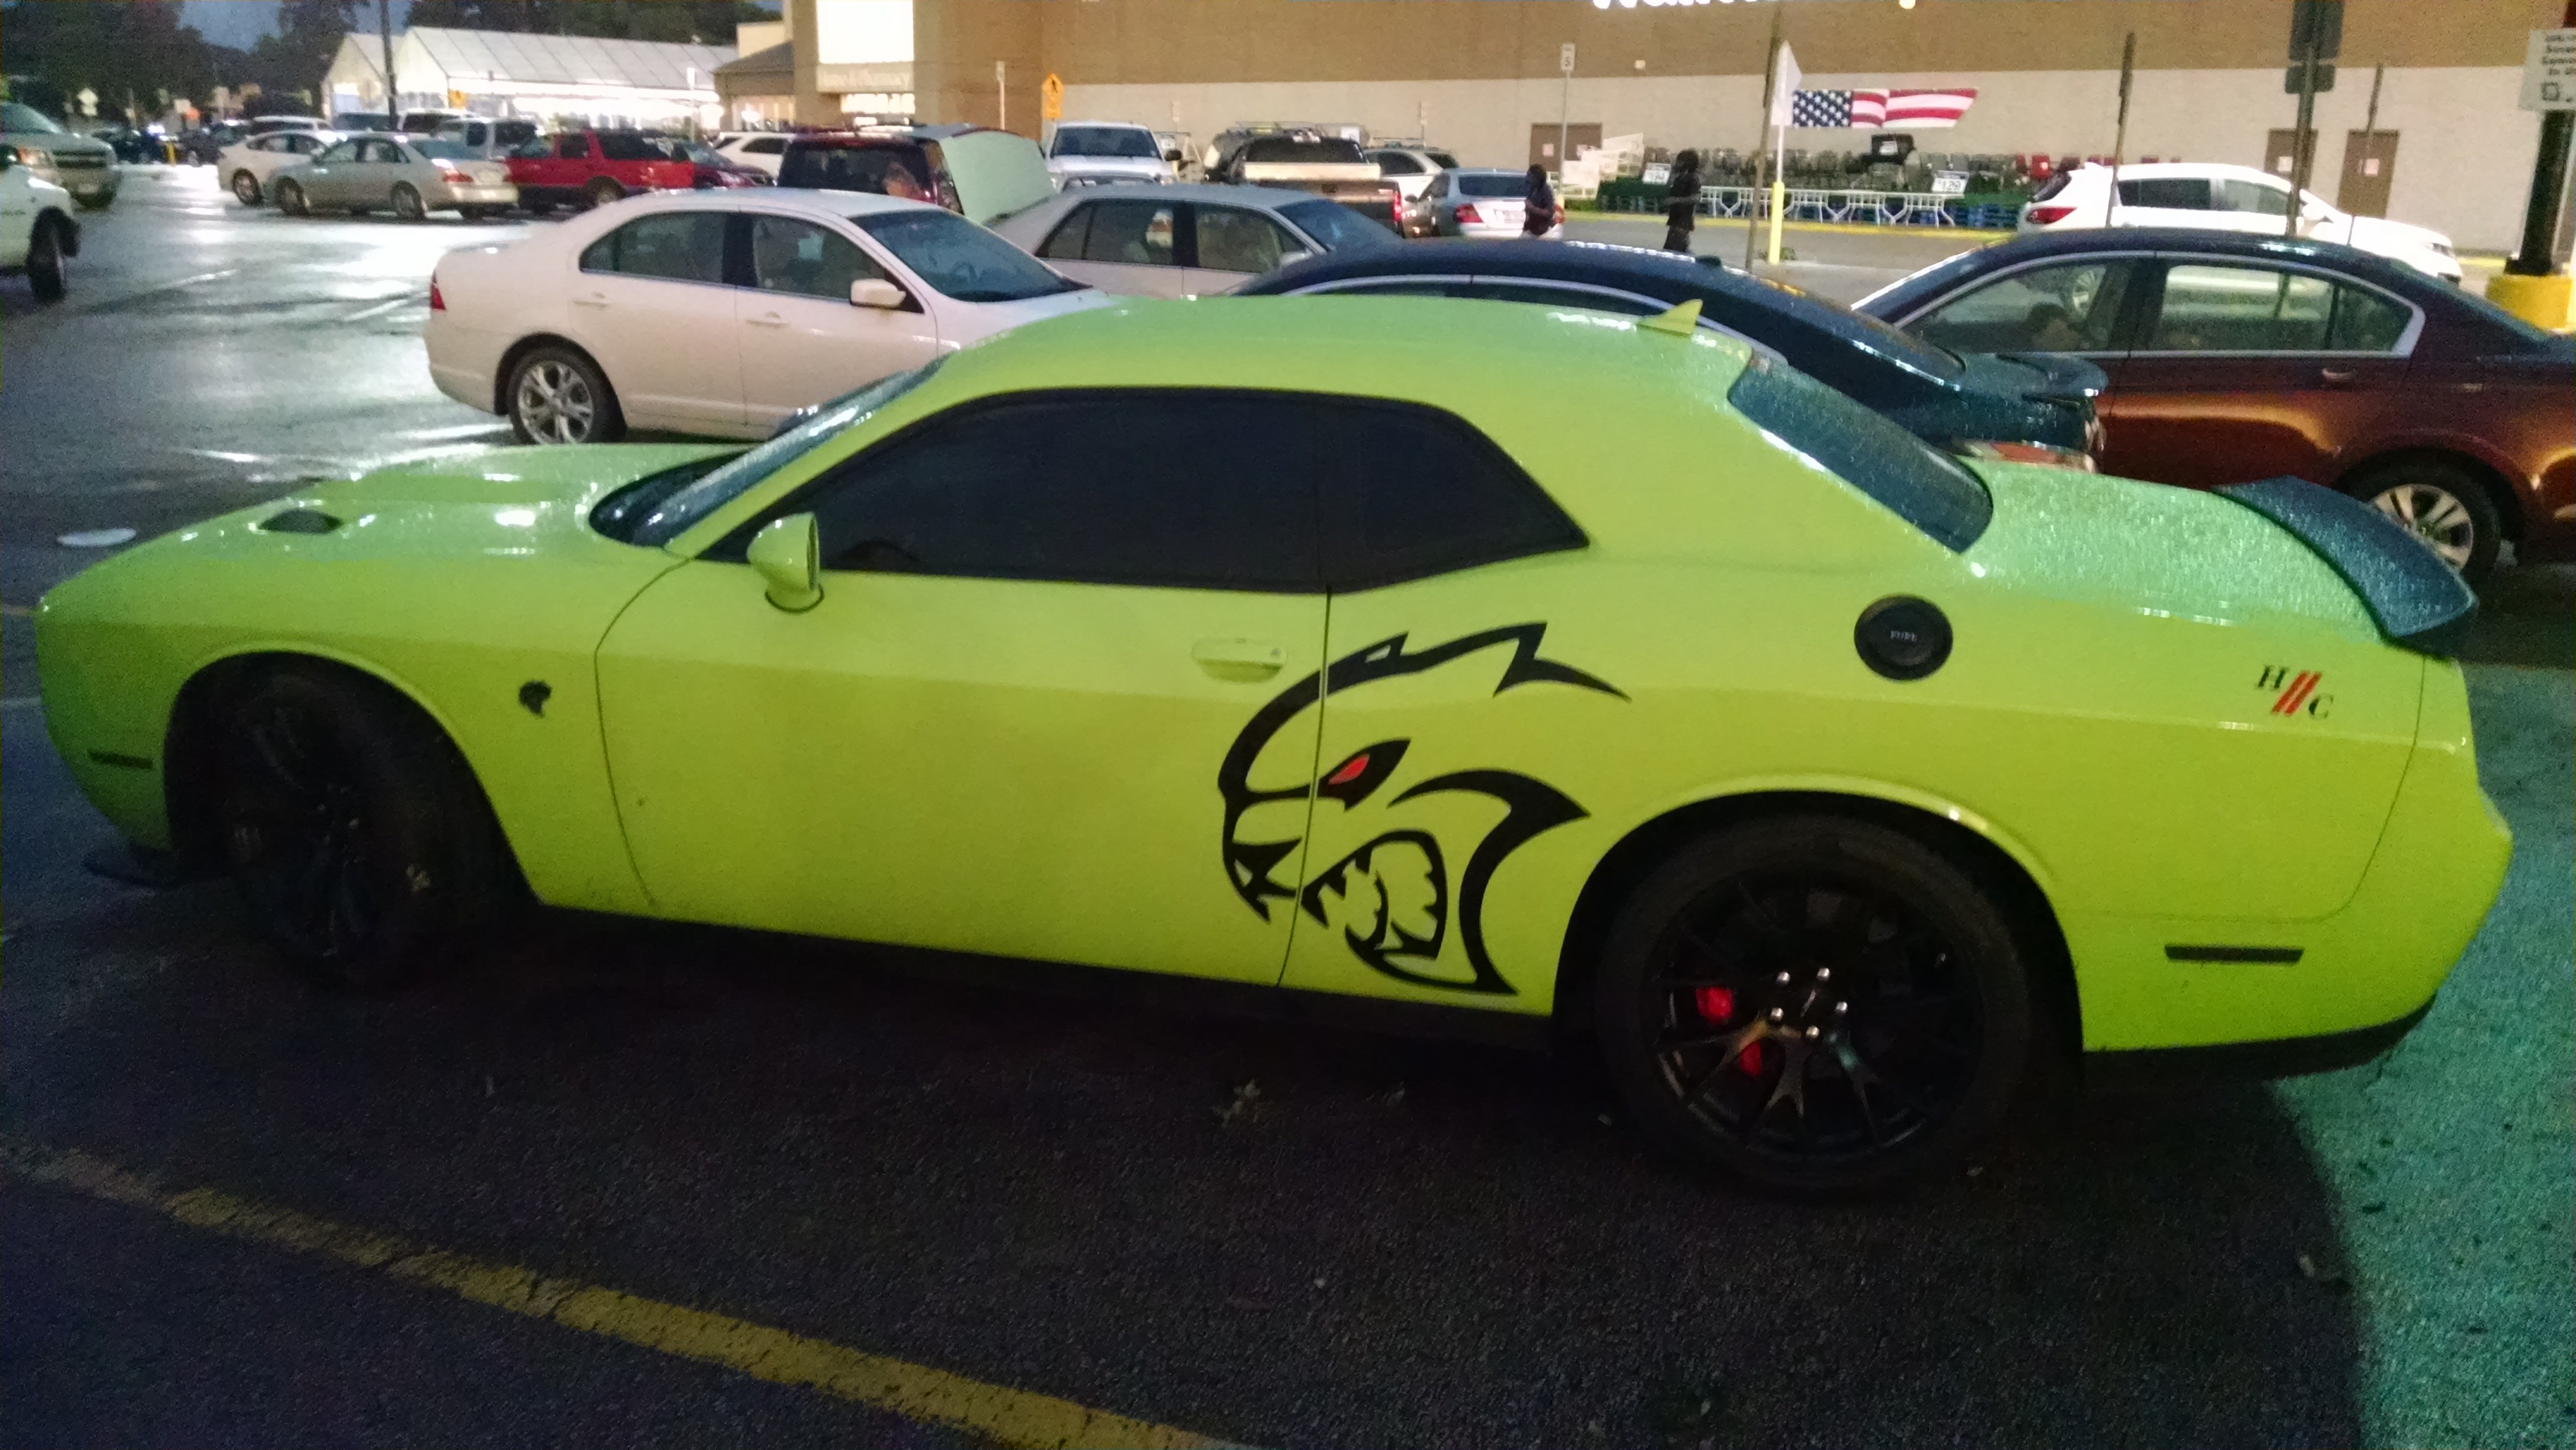 Hellcat Decals for the Dodge Challenger Spark a Debate.